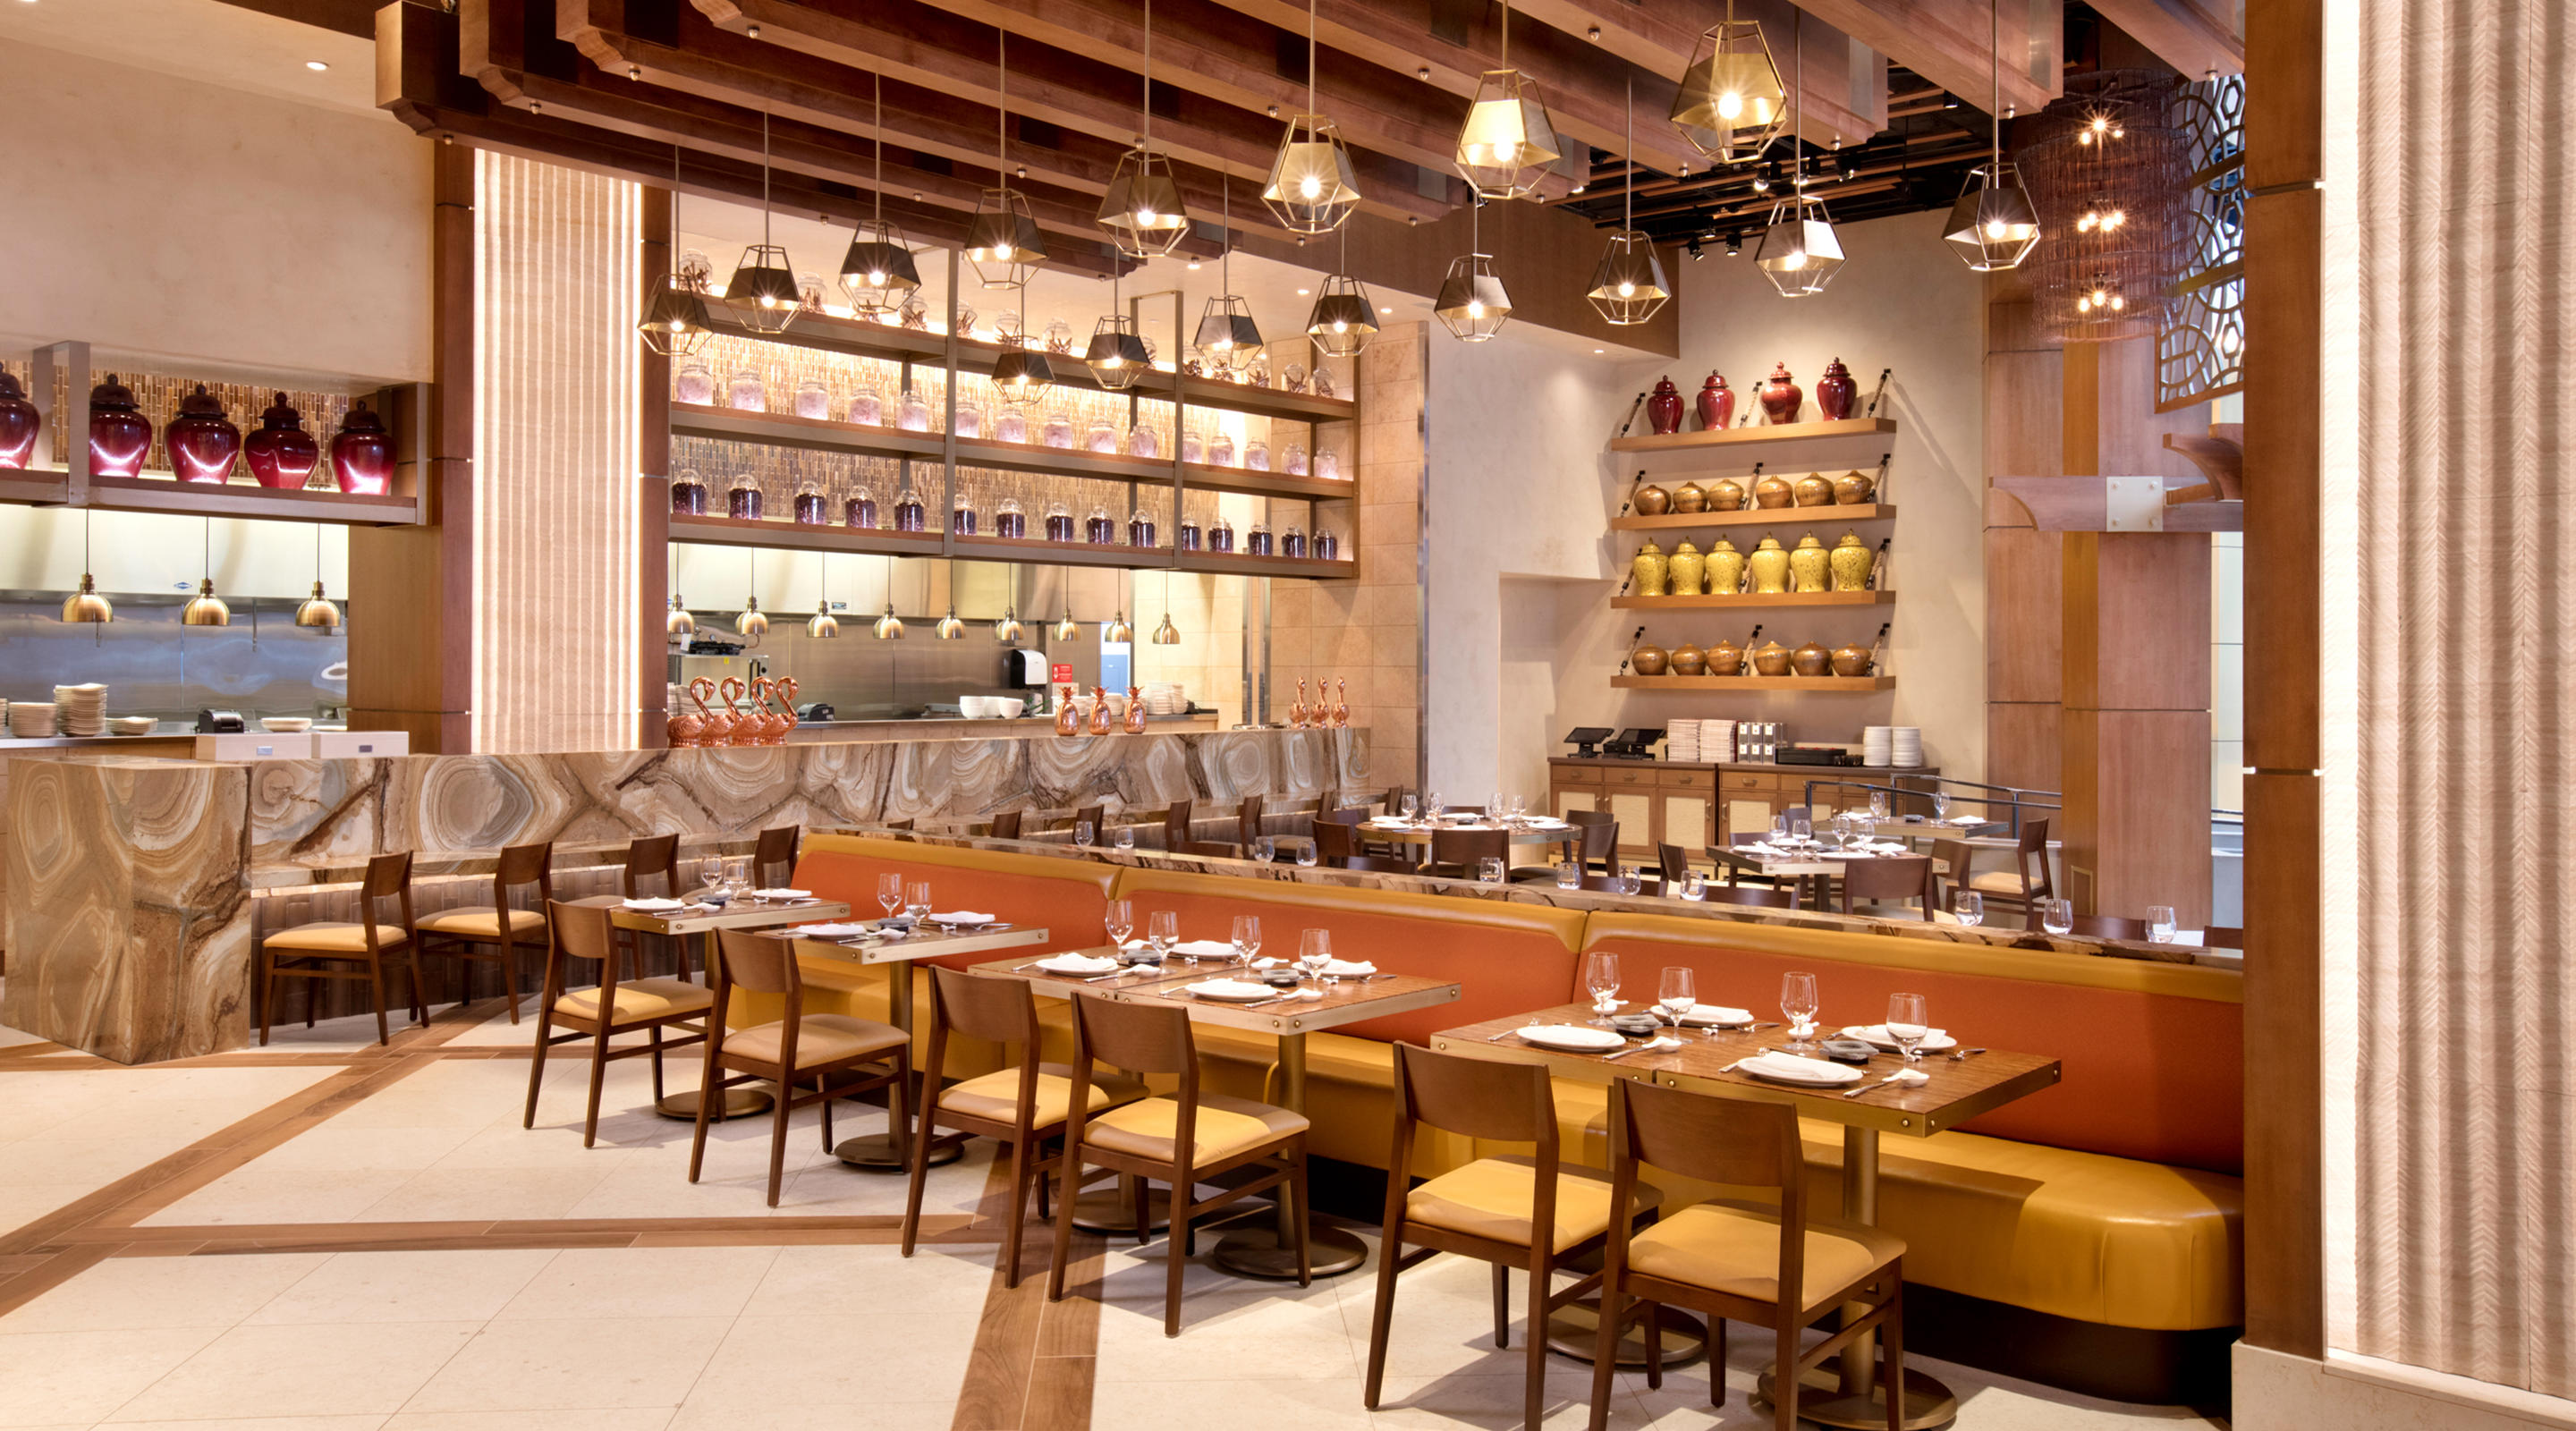 Take your appetite on a culinary tour of Asia at Ginger.